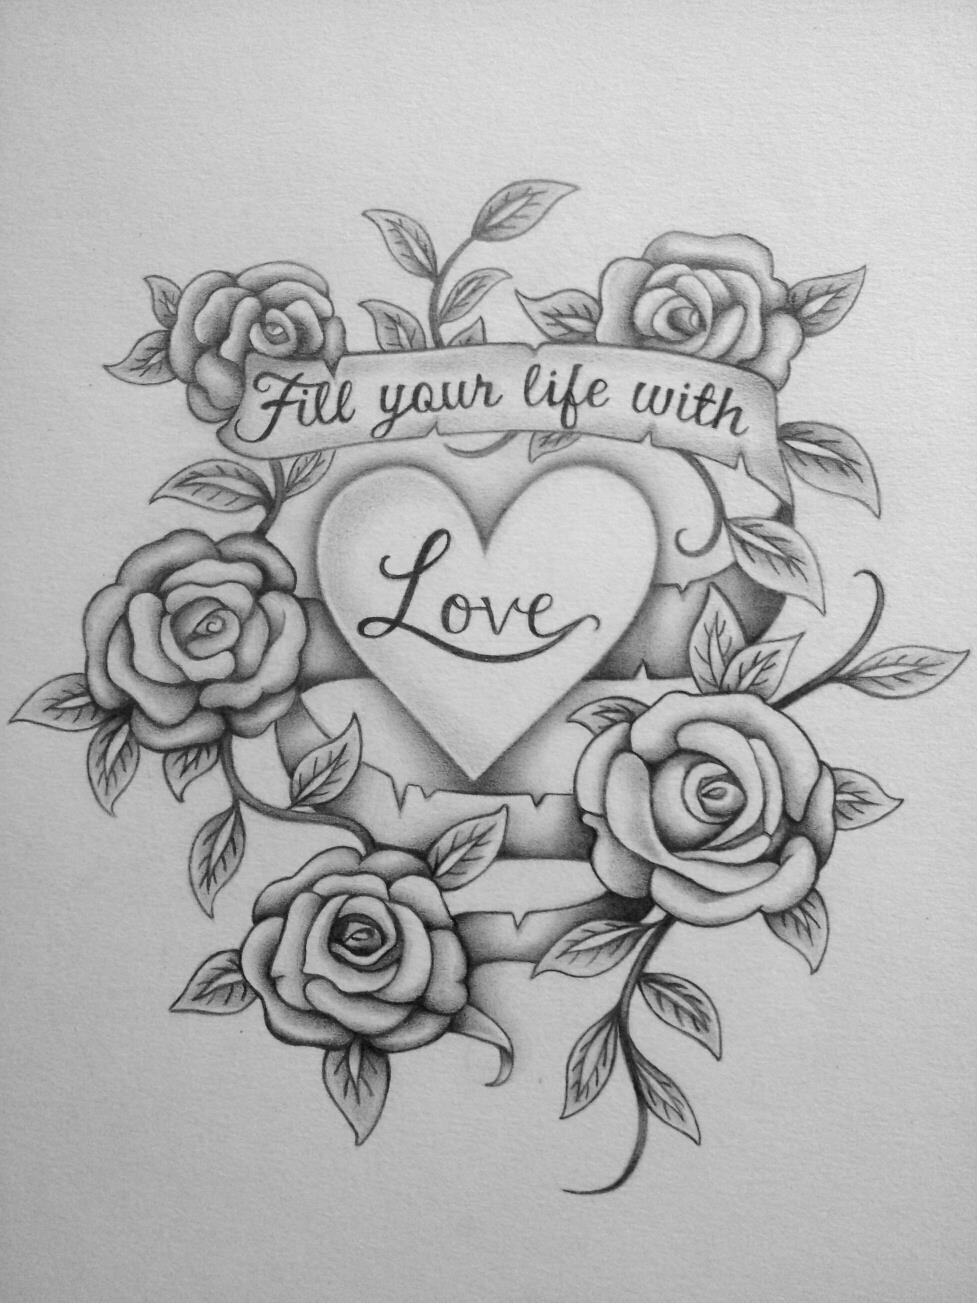 Free I Love You Drawings In Pencil With Heart, Download ...